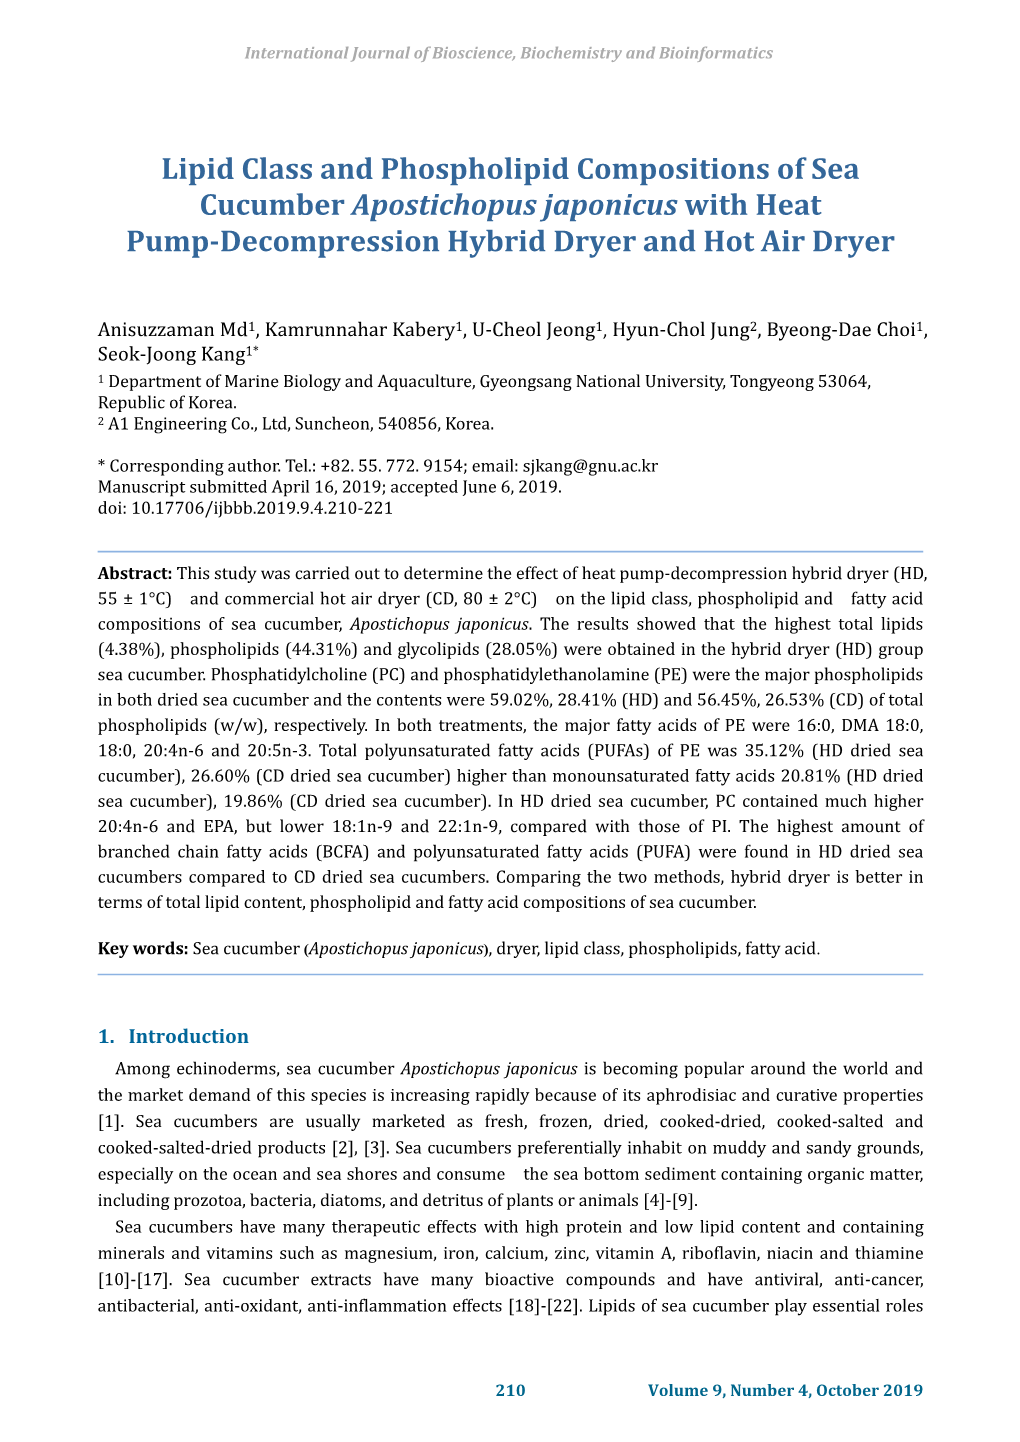 Lipid Class and Phospholipid Compositions of Sea Cucumber Apostichopus Japonicus with Heat Pump-Decompression Hybrid Dryer and Hot Air Dryer